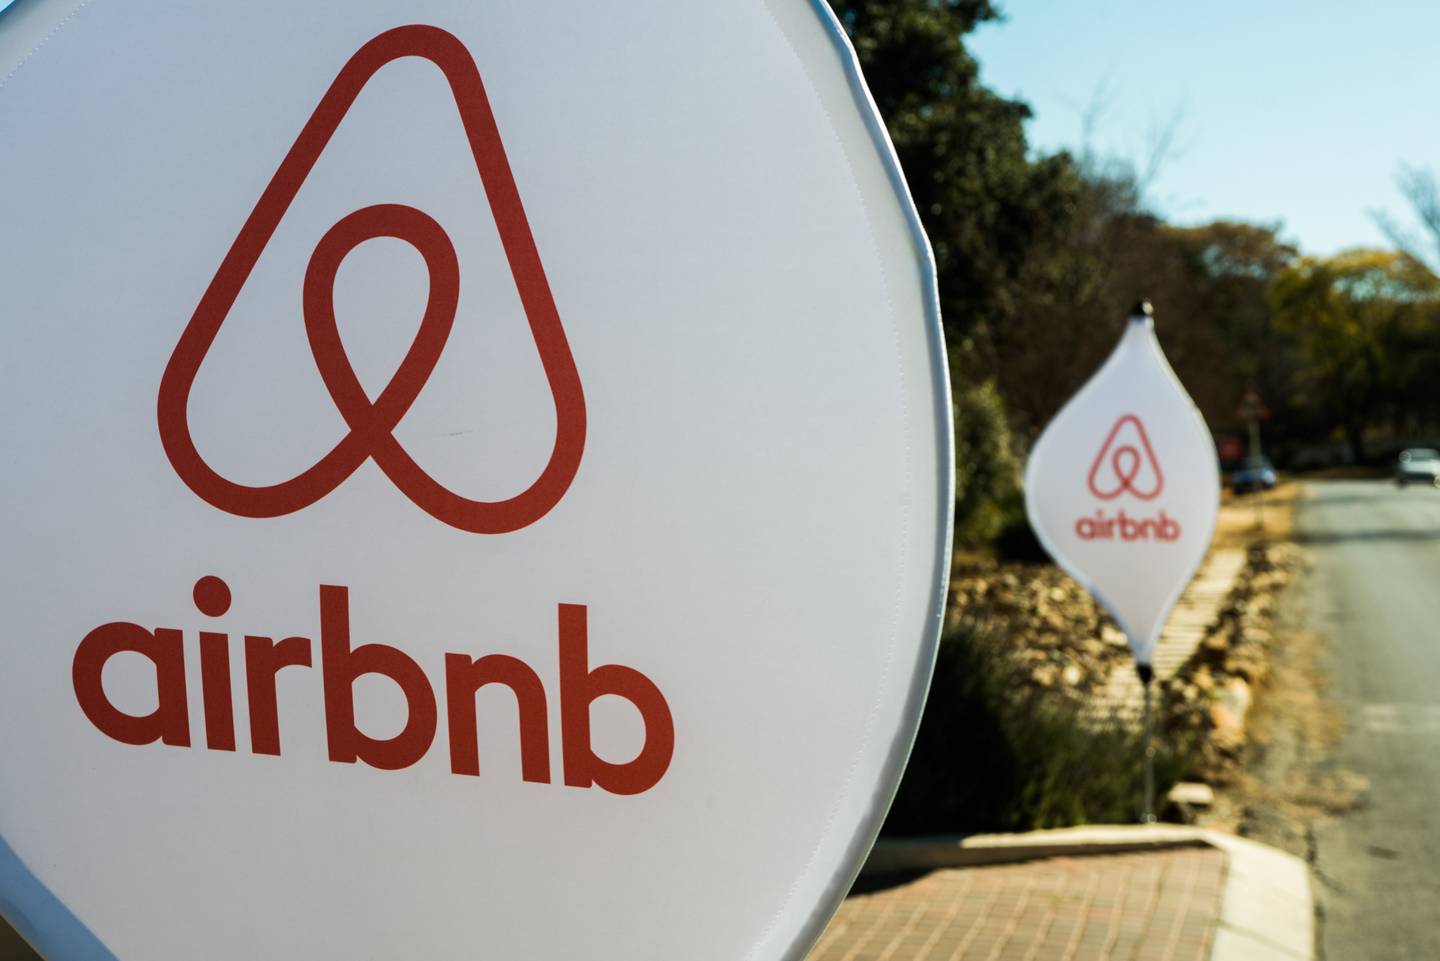 Airbnb had a record revenue of $2.9 billion in the third quarter, growing 29% year over year.